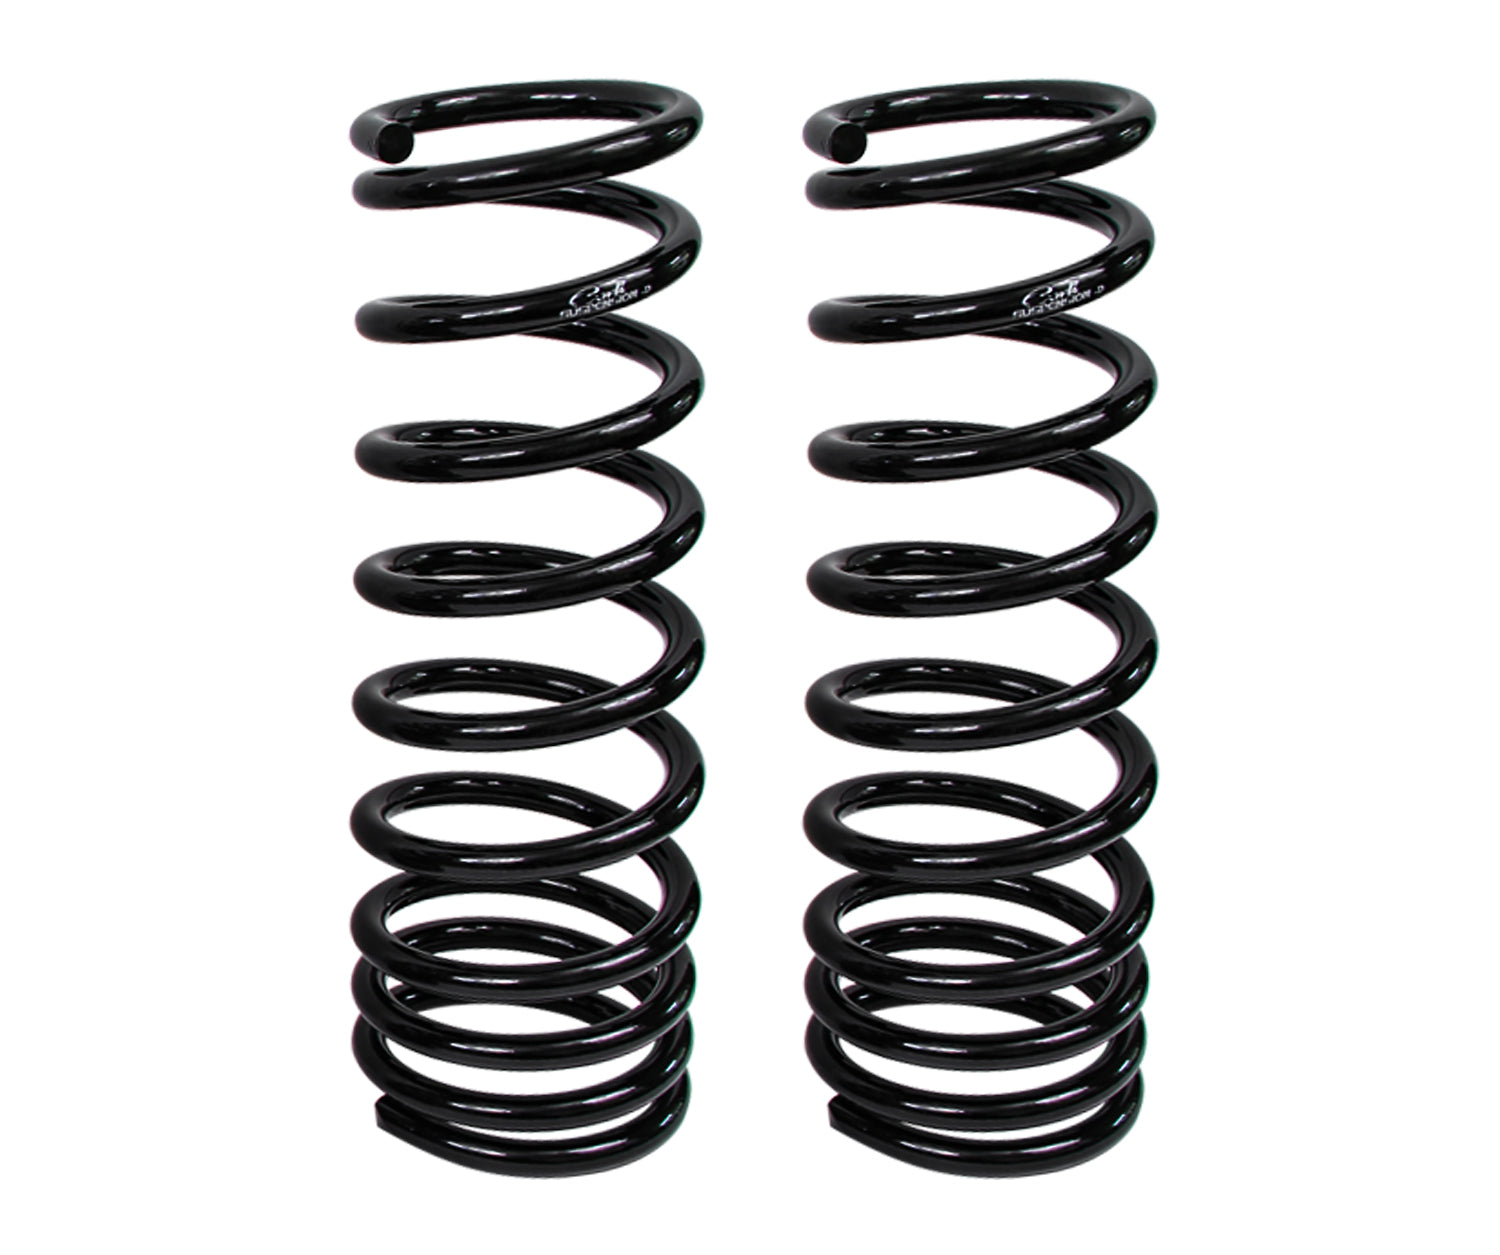 Carli Suspension CS-DMRC-03-H 2.75 inch Lift Front Multi-Rate Coil Springs